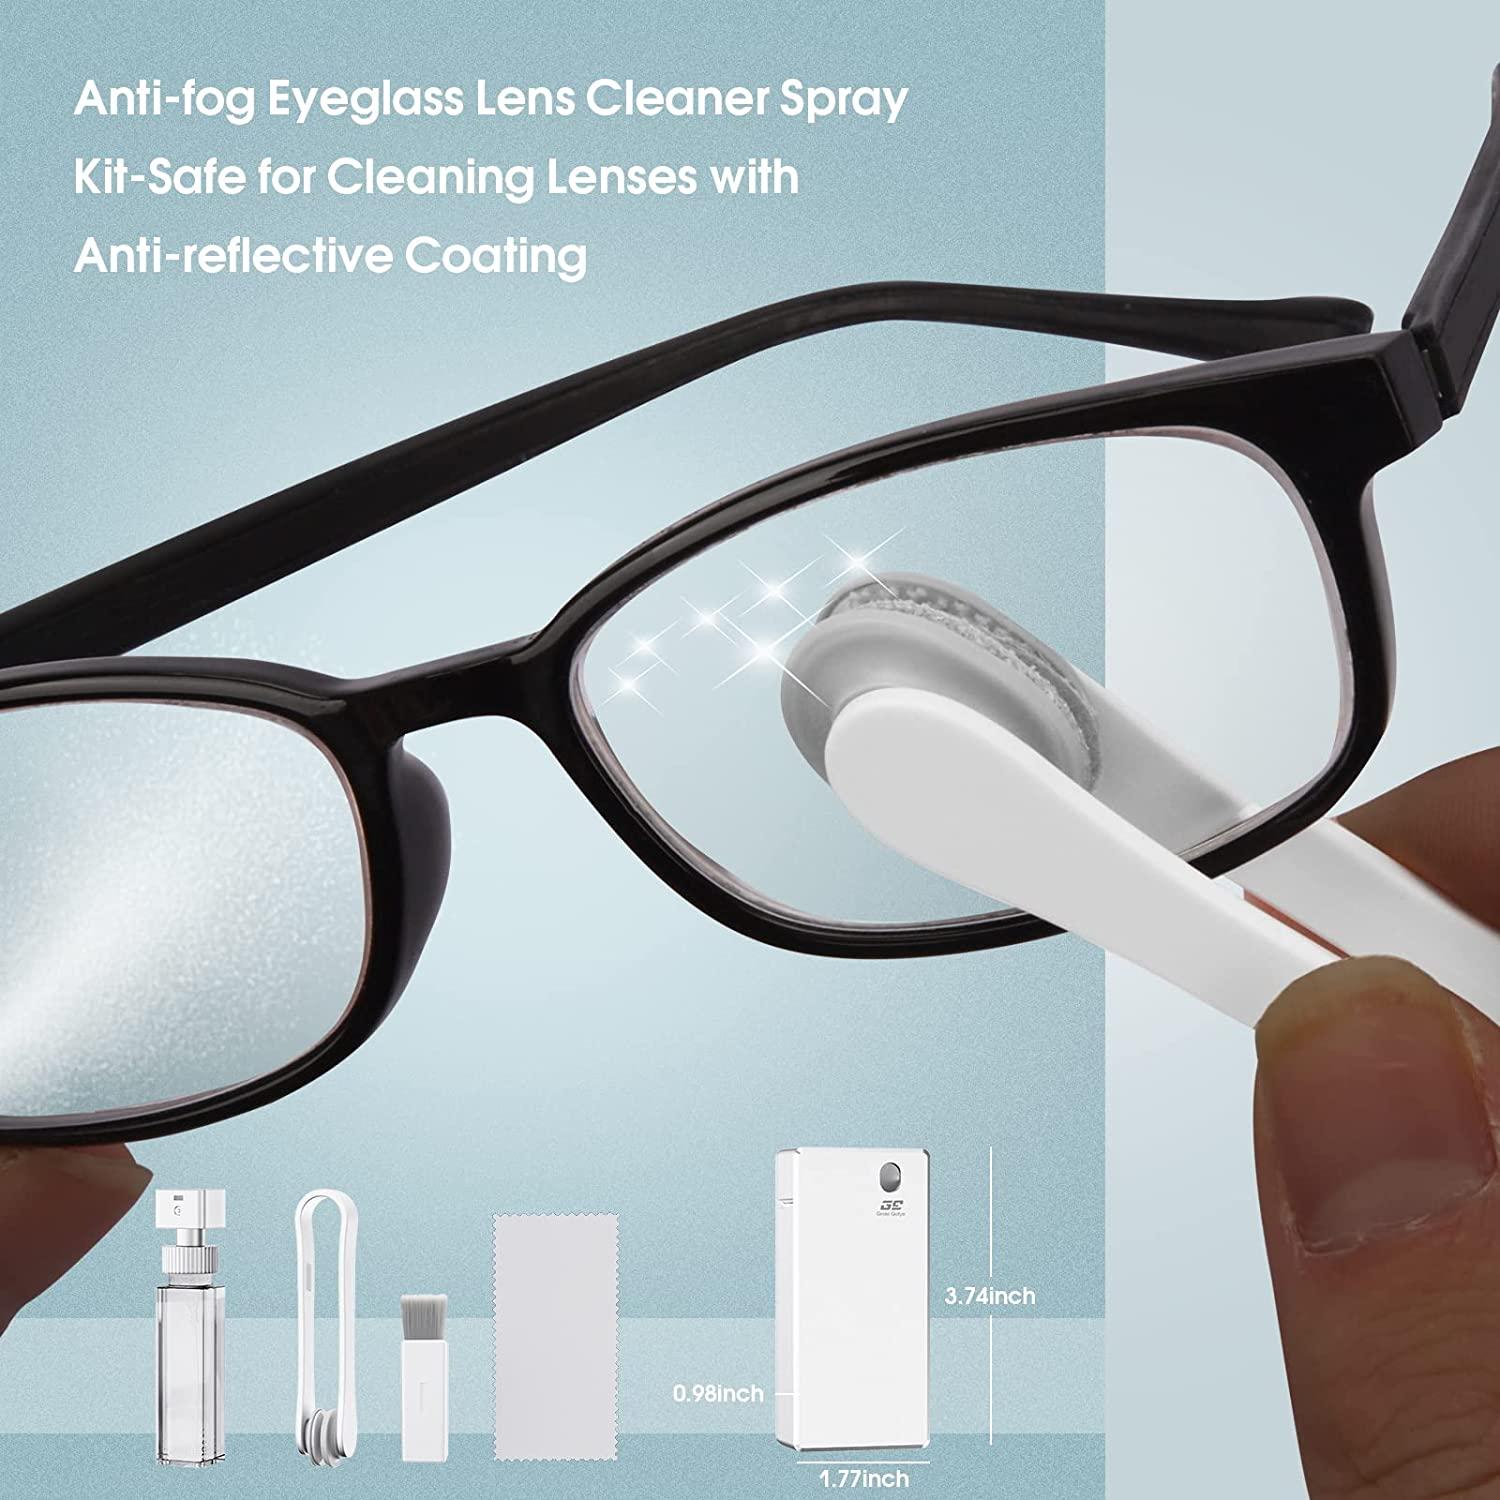 How to clean glasses: Cleaning cloths and cleaners